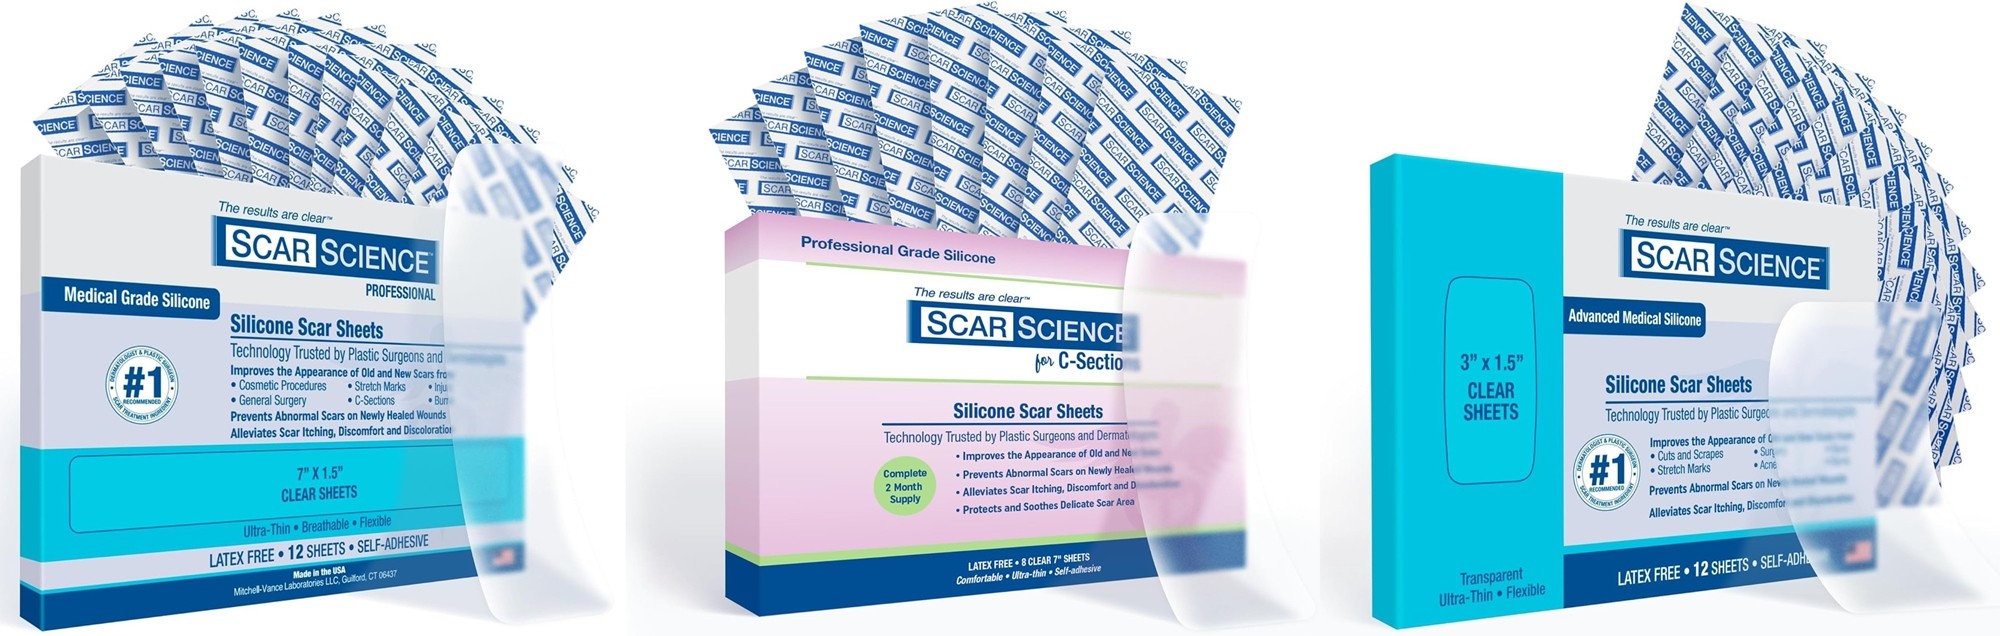 ScarScience Welcomes Innovations in Scar Care